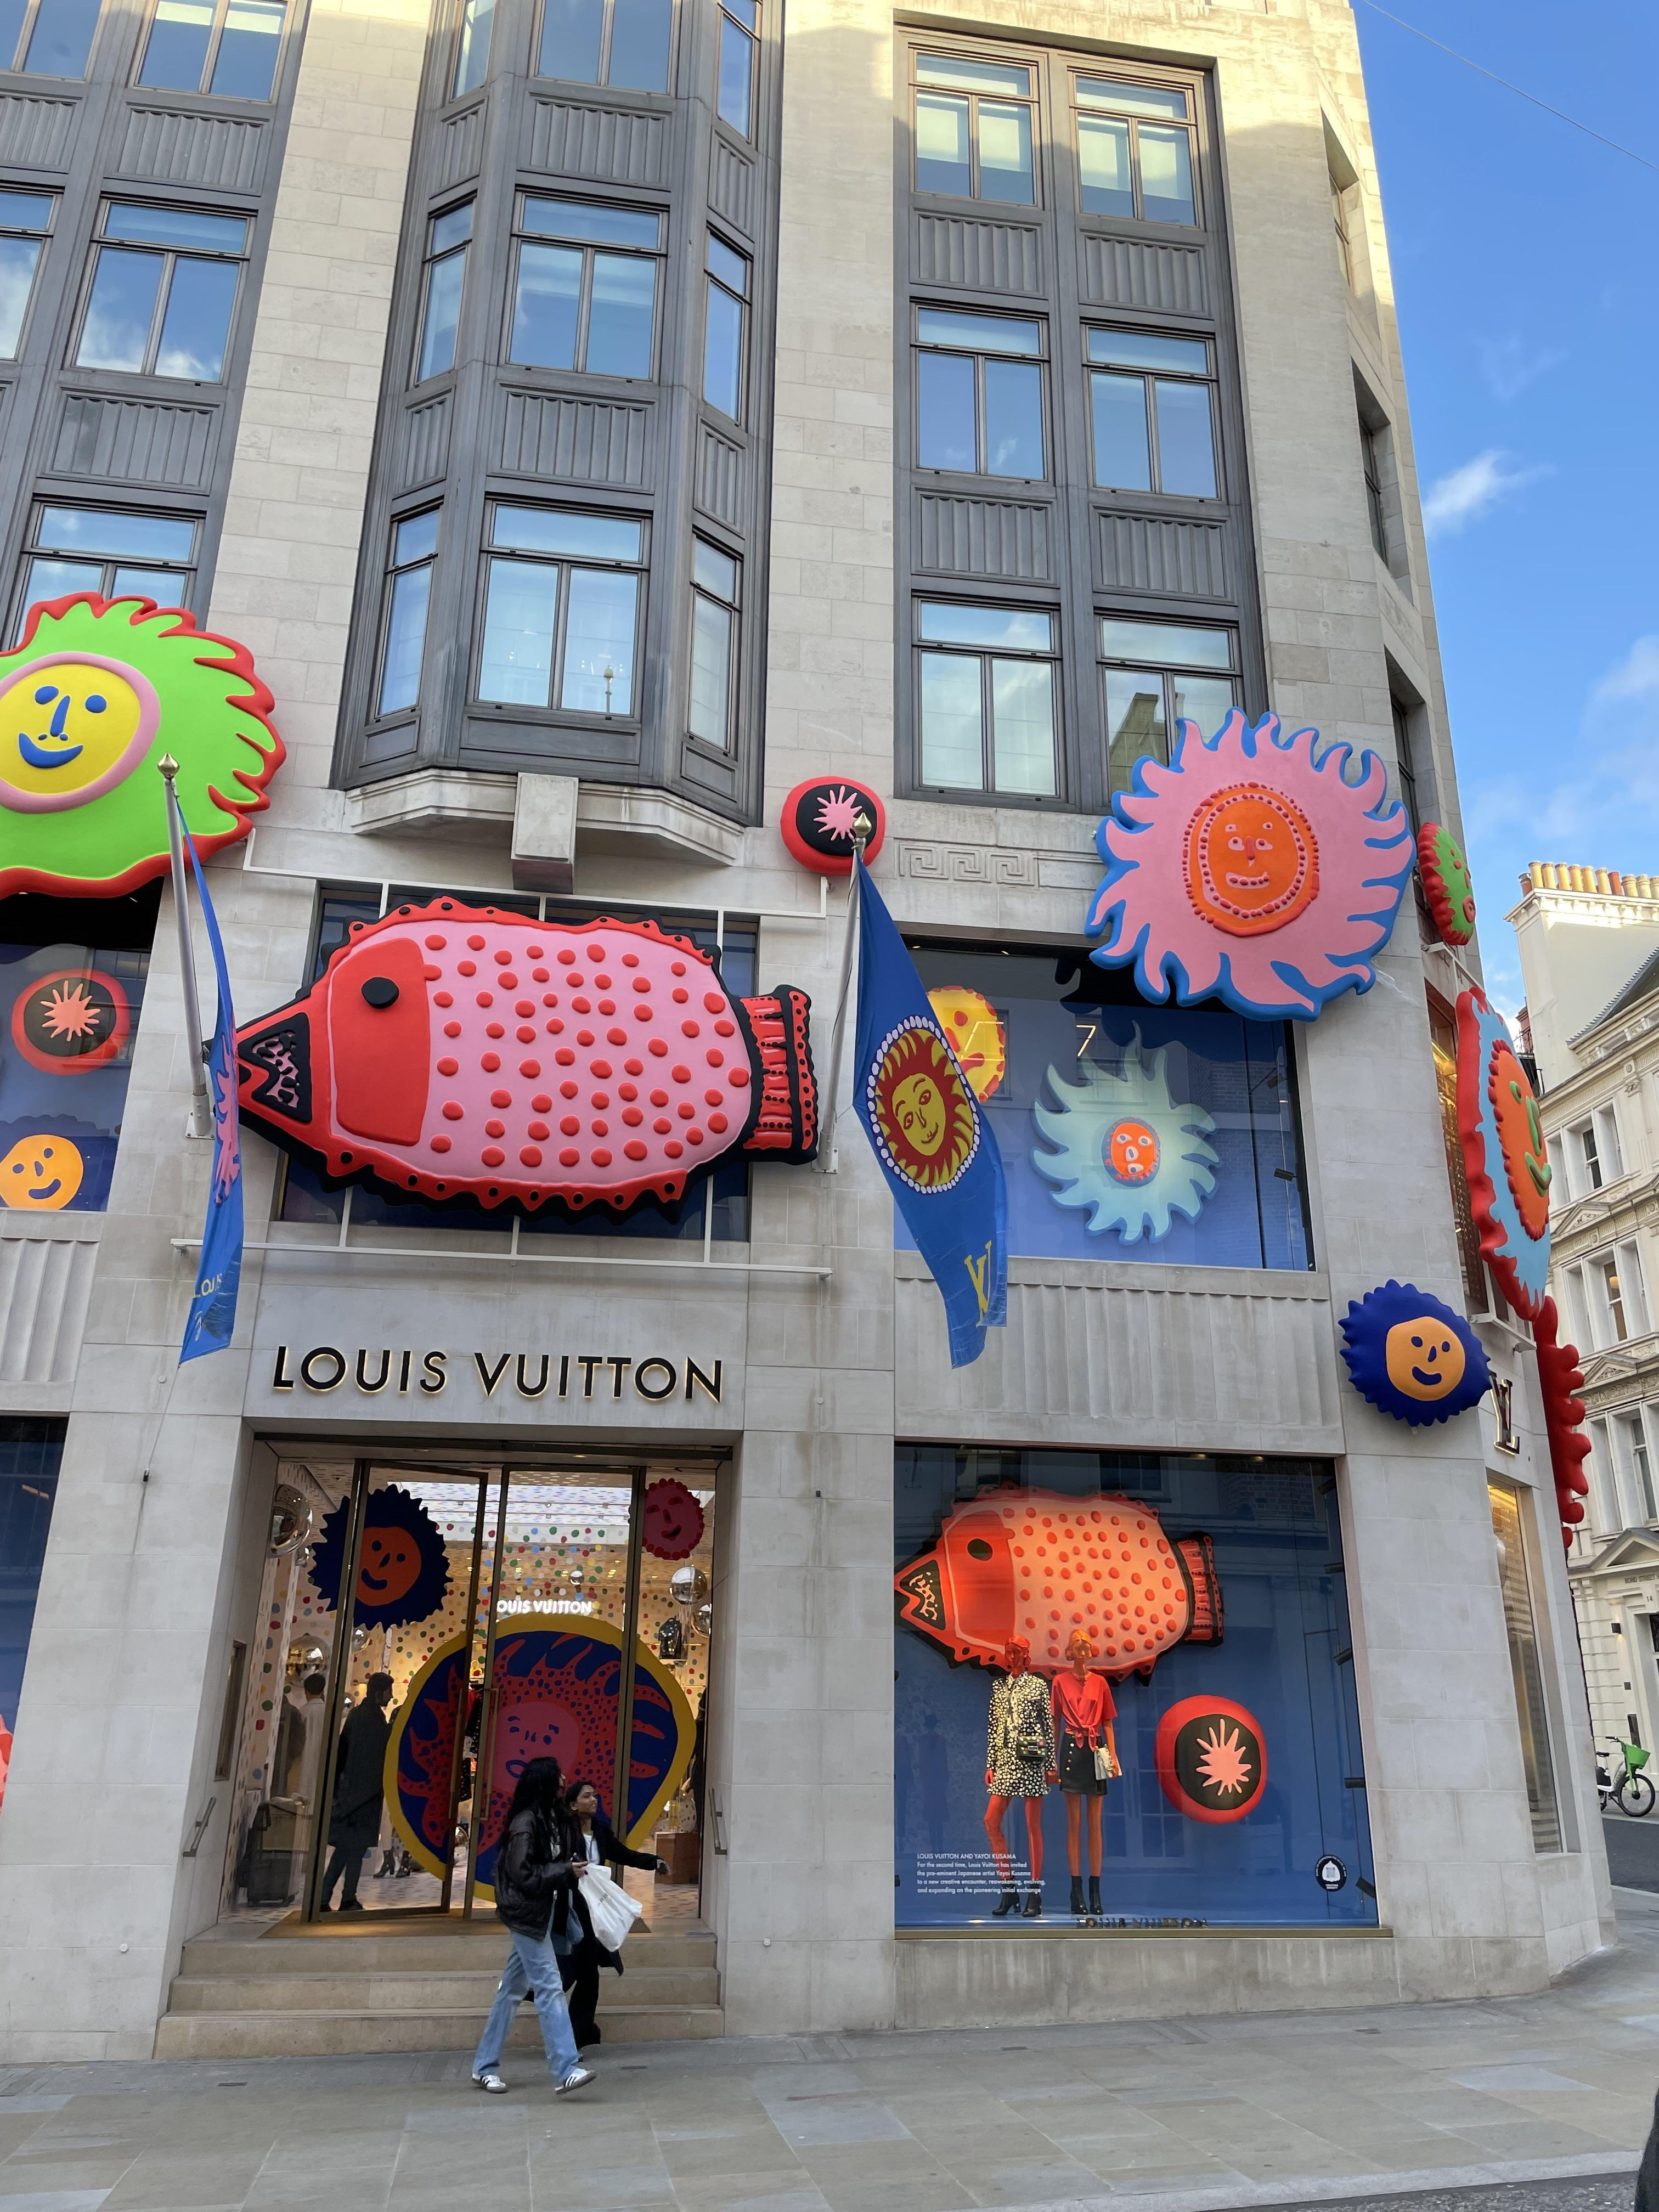 Louis Vuitton on X: Infinite possibilities. Showcasing the new